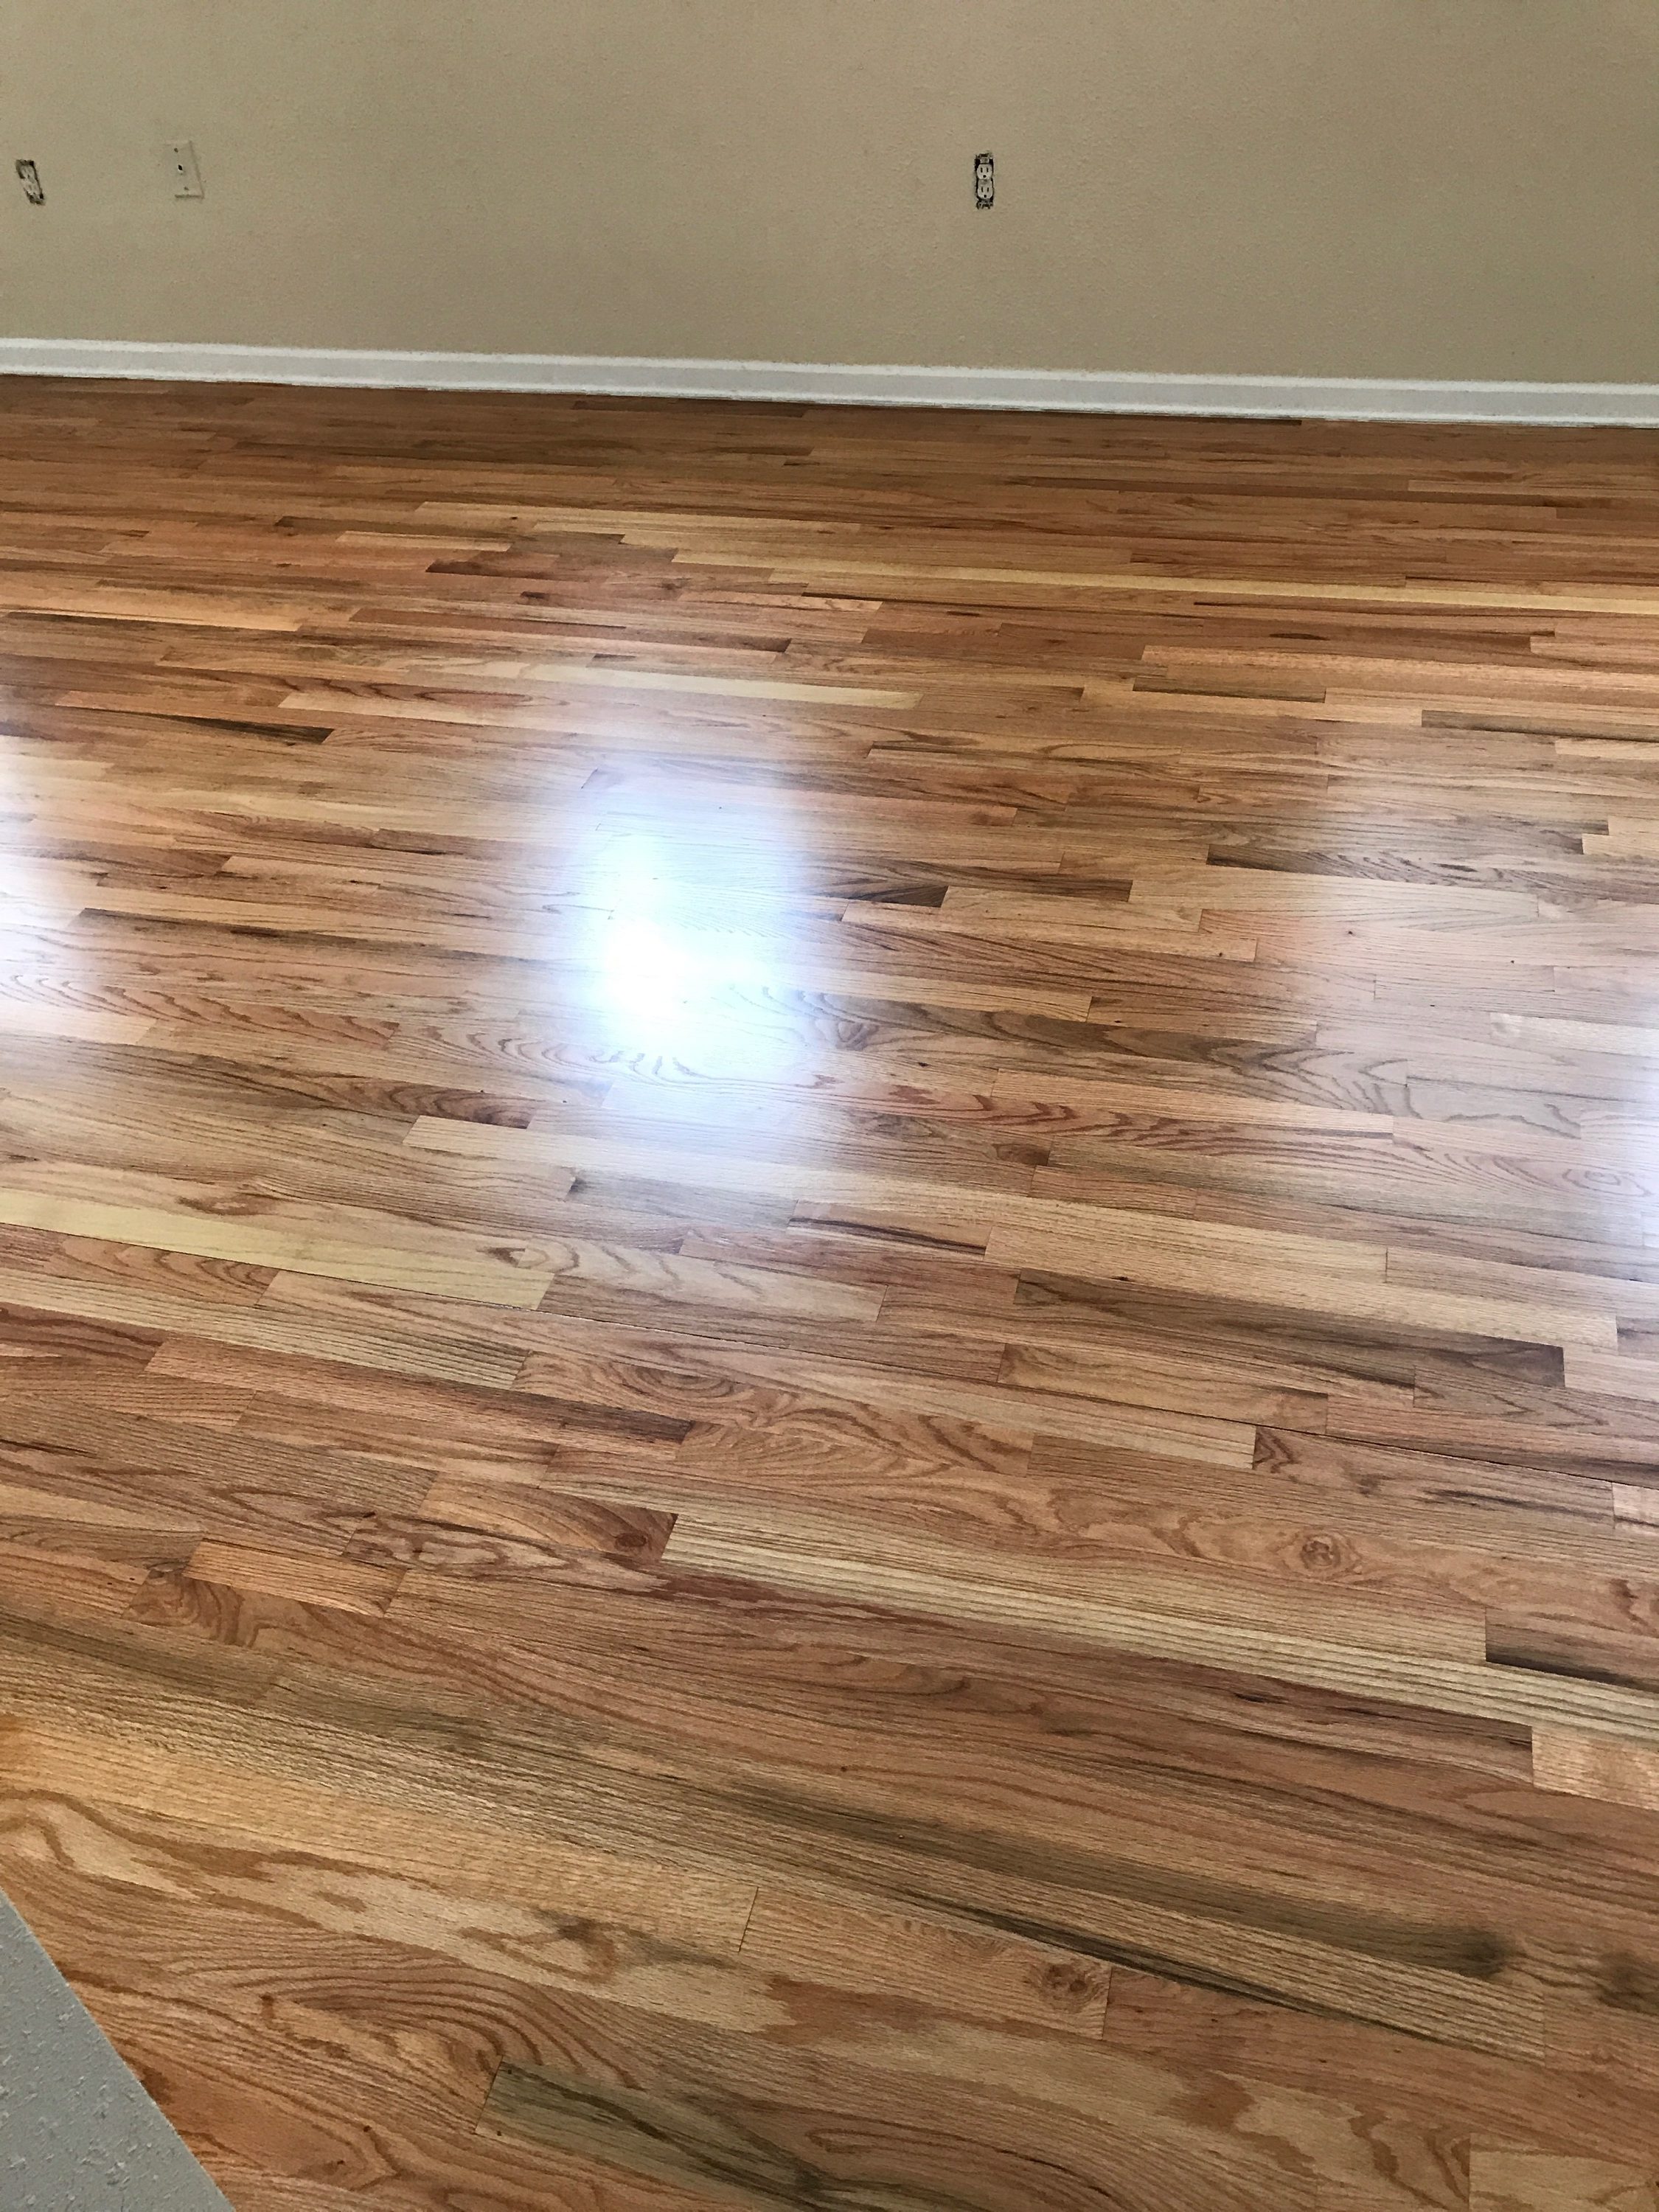 Pictured are red oak floors with a natural finish. The contrasting colors in the wood grain are eye catching with shades of red tones, browns, and creamy white.